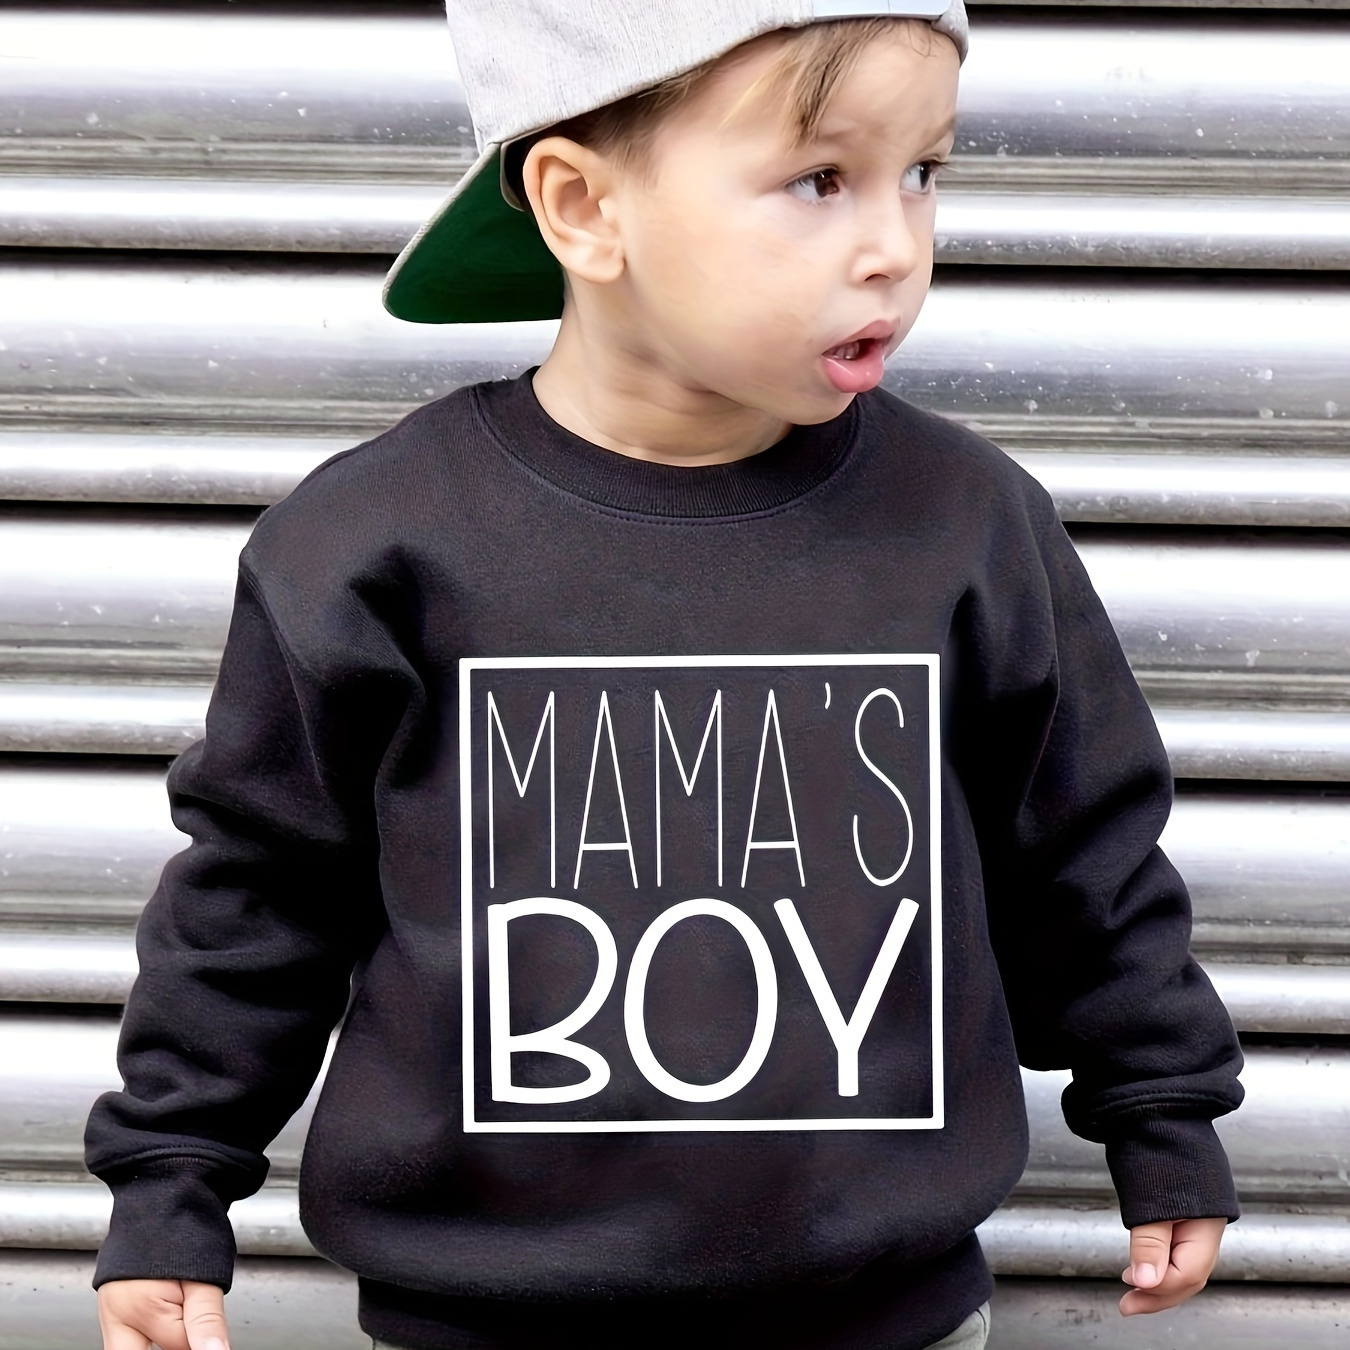 

Mama's Boy Letter Print Sweatshirt For Boys - Casual Creative Design With Stretch Fabric For Comfortable Autumn/winter Wear